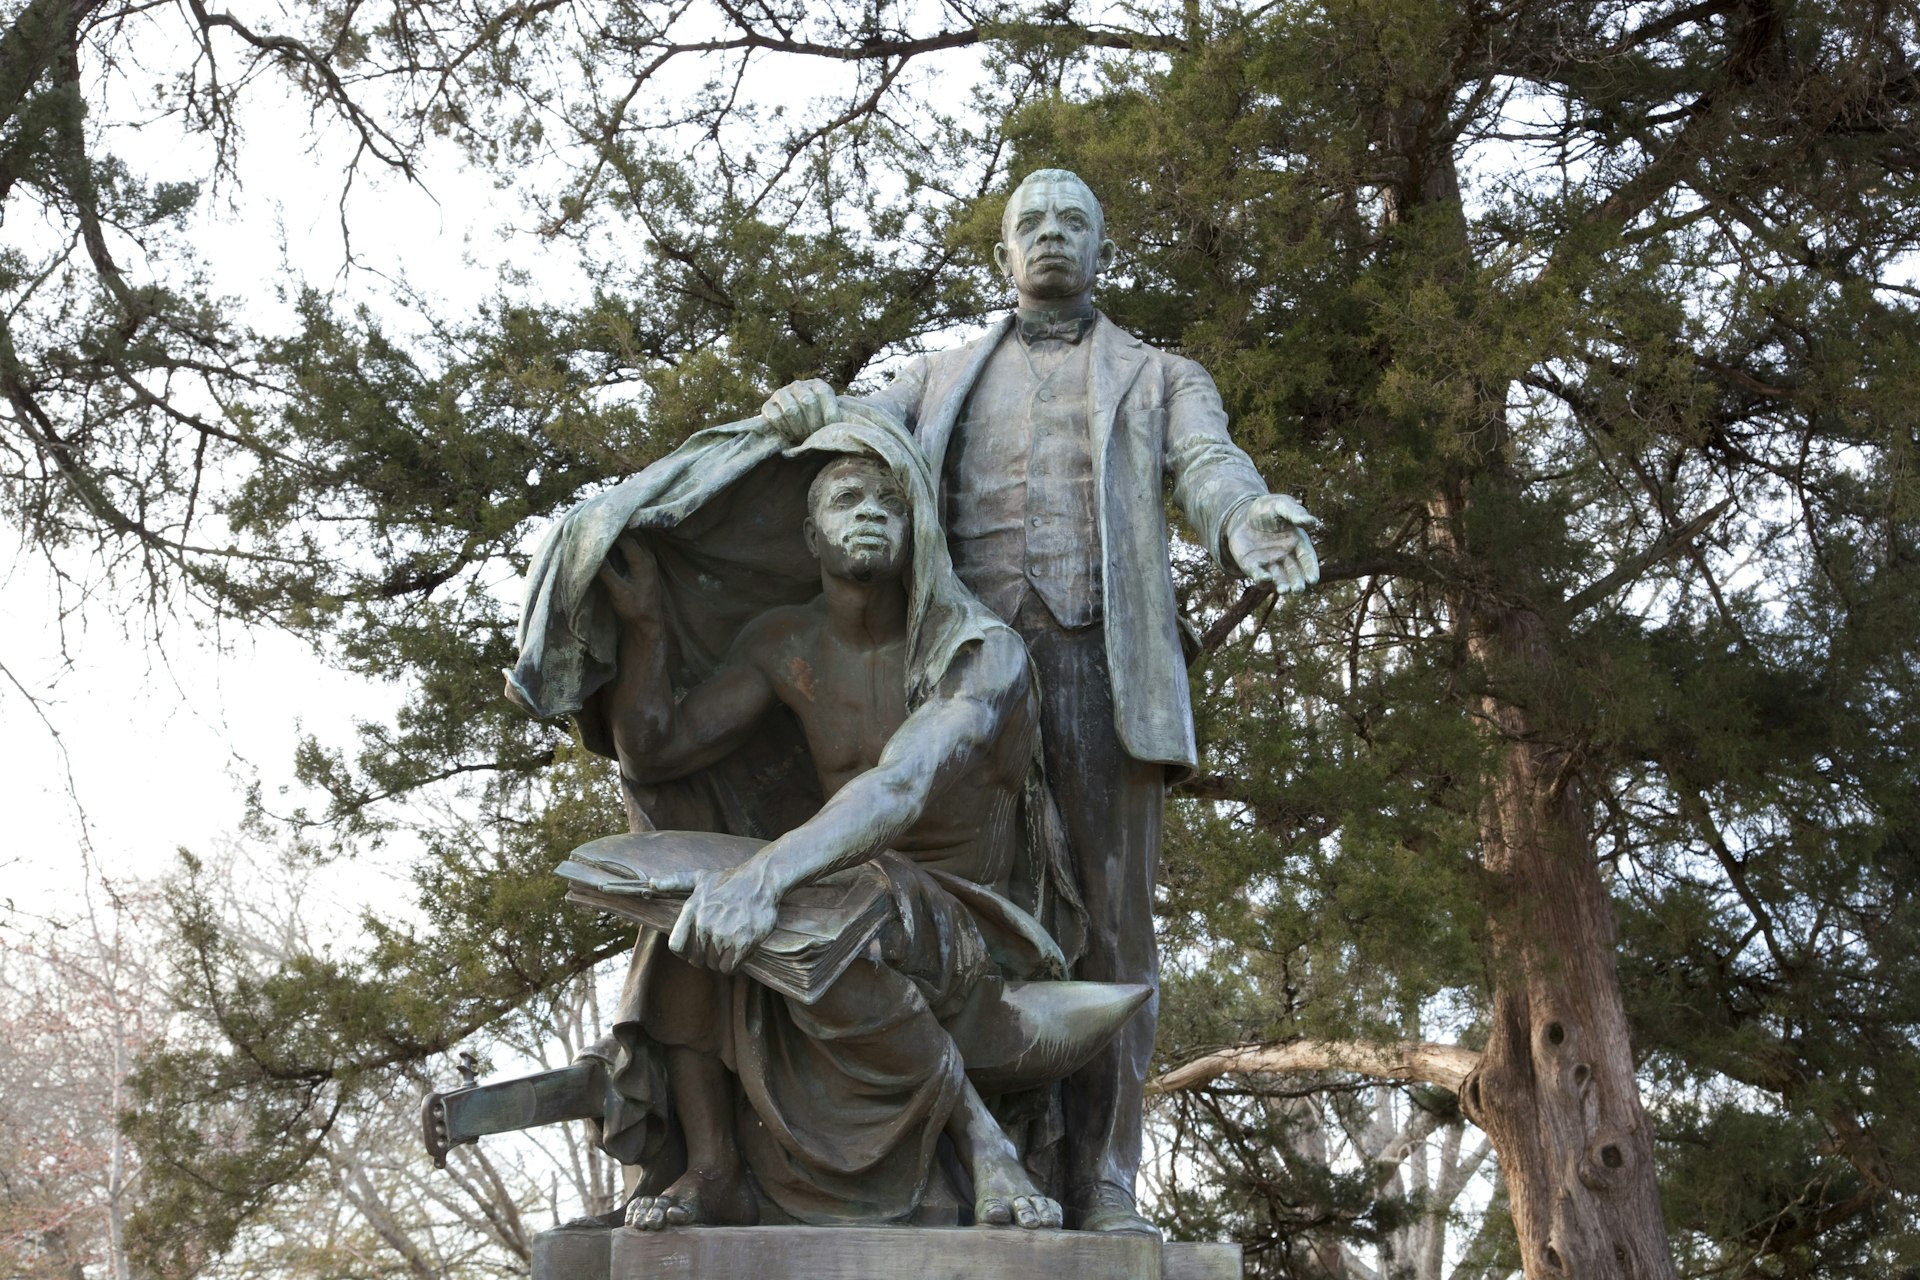 Statue of Booker T. Washington "lifting the veil of ignorance" from an enslaved man on the Tuskegee University campus 